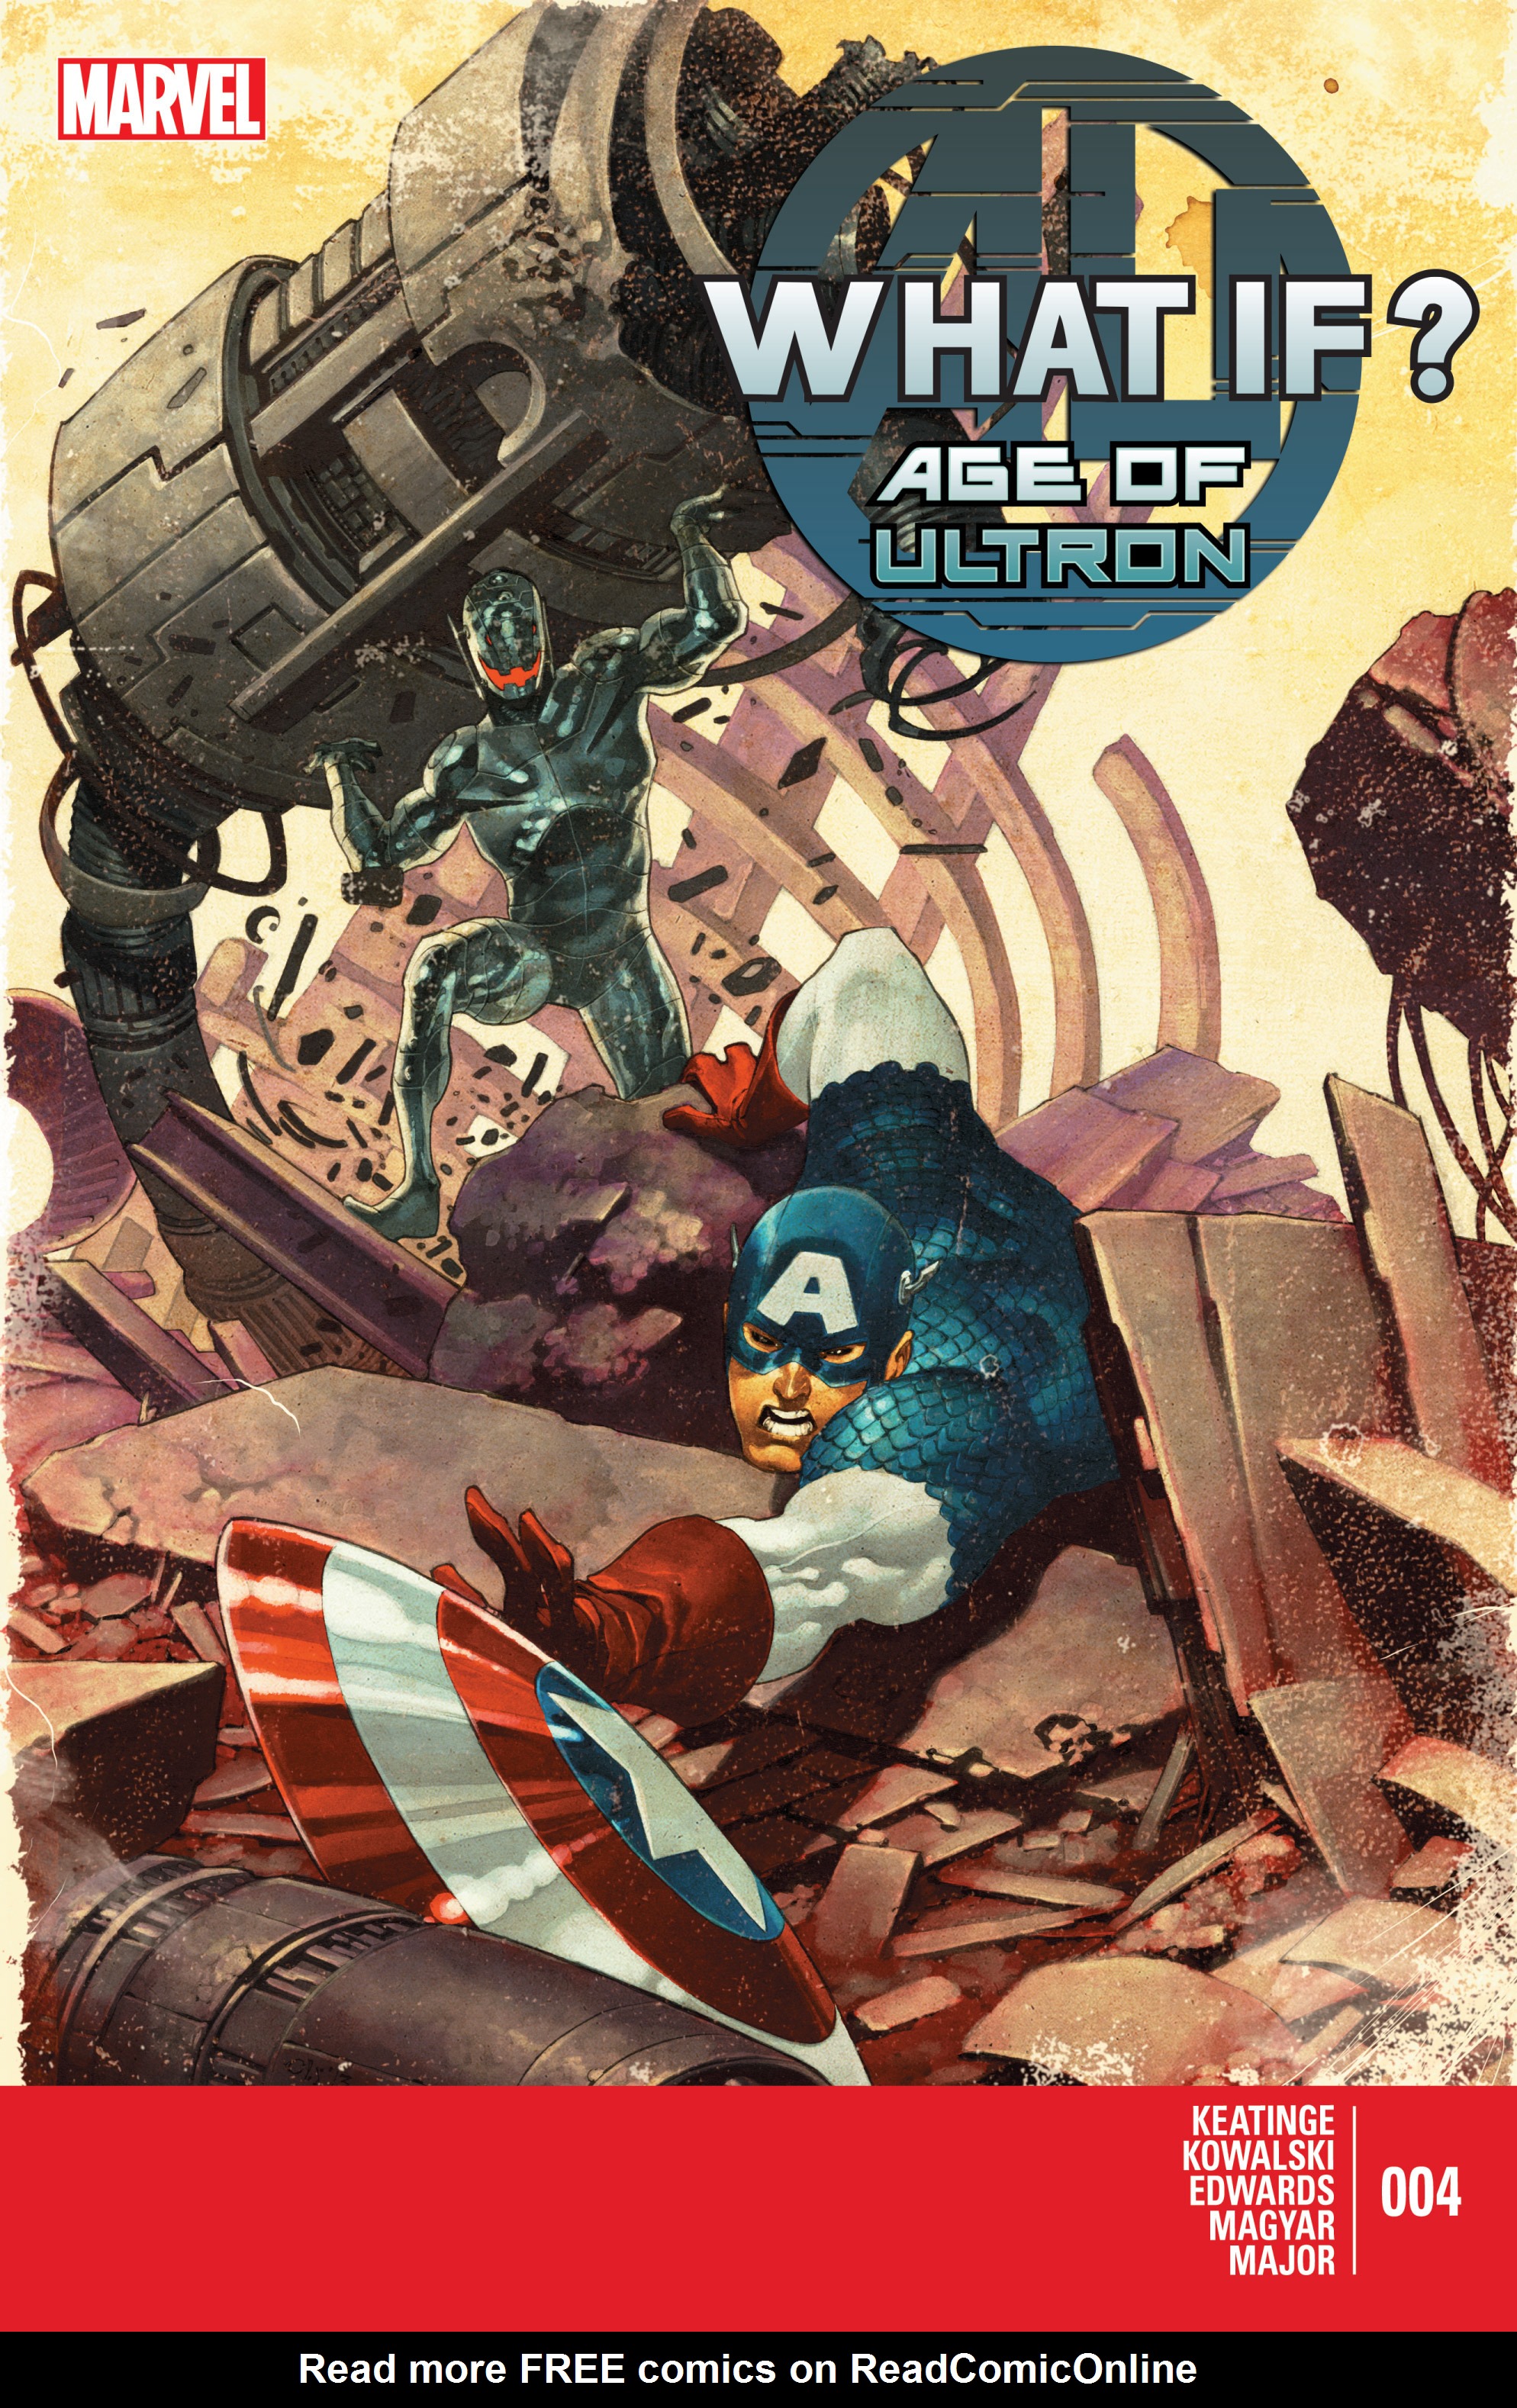 Read online What If? Age of Ultron comic -  Issue # _TPB - 69